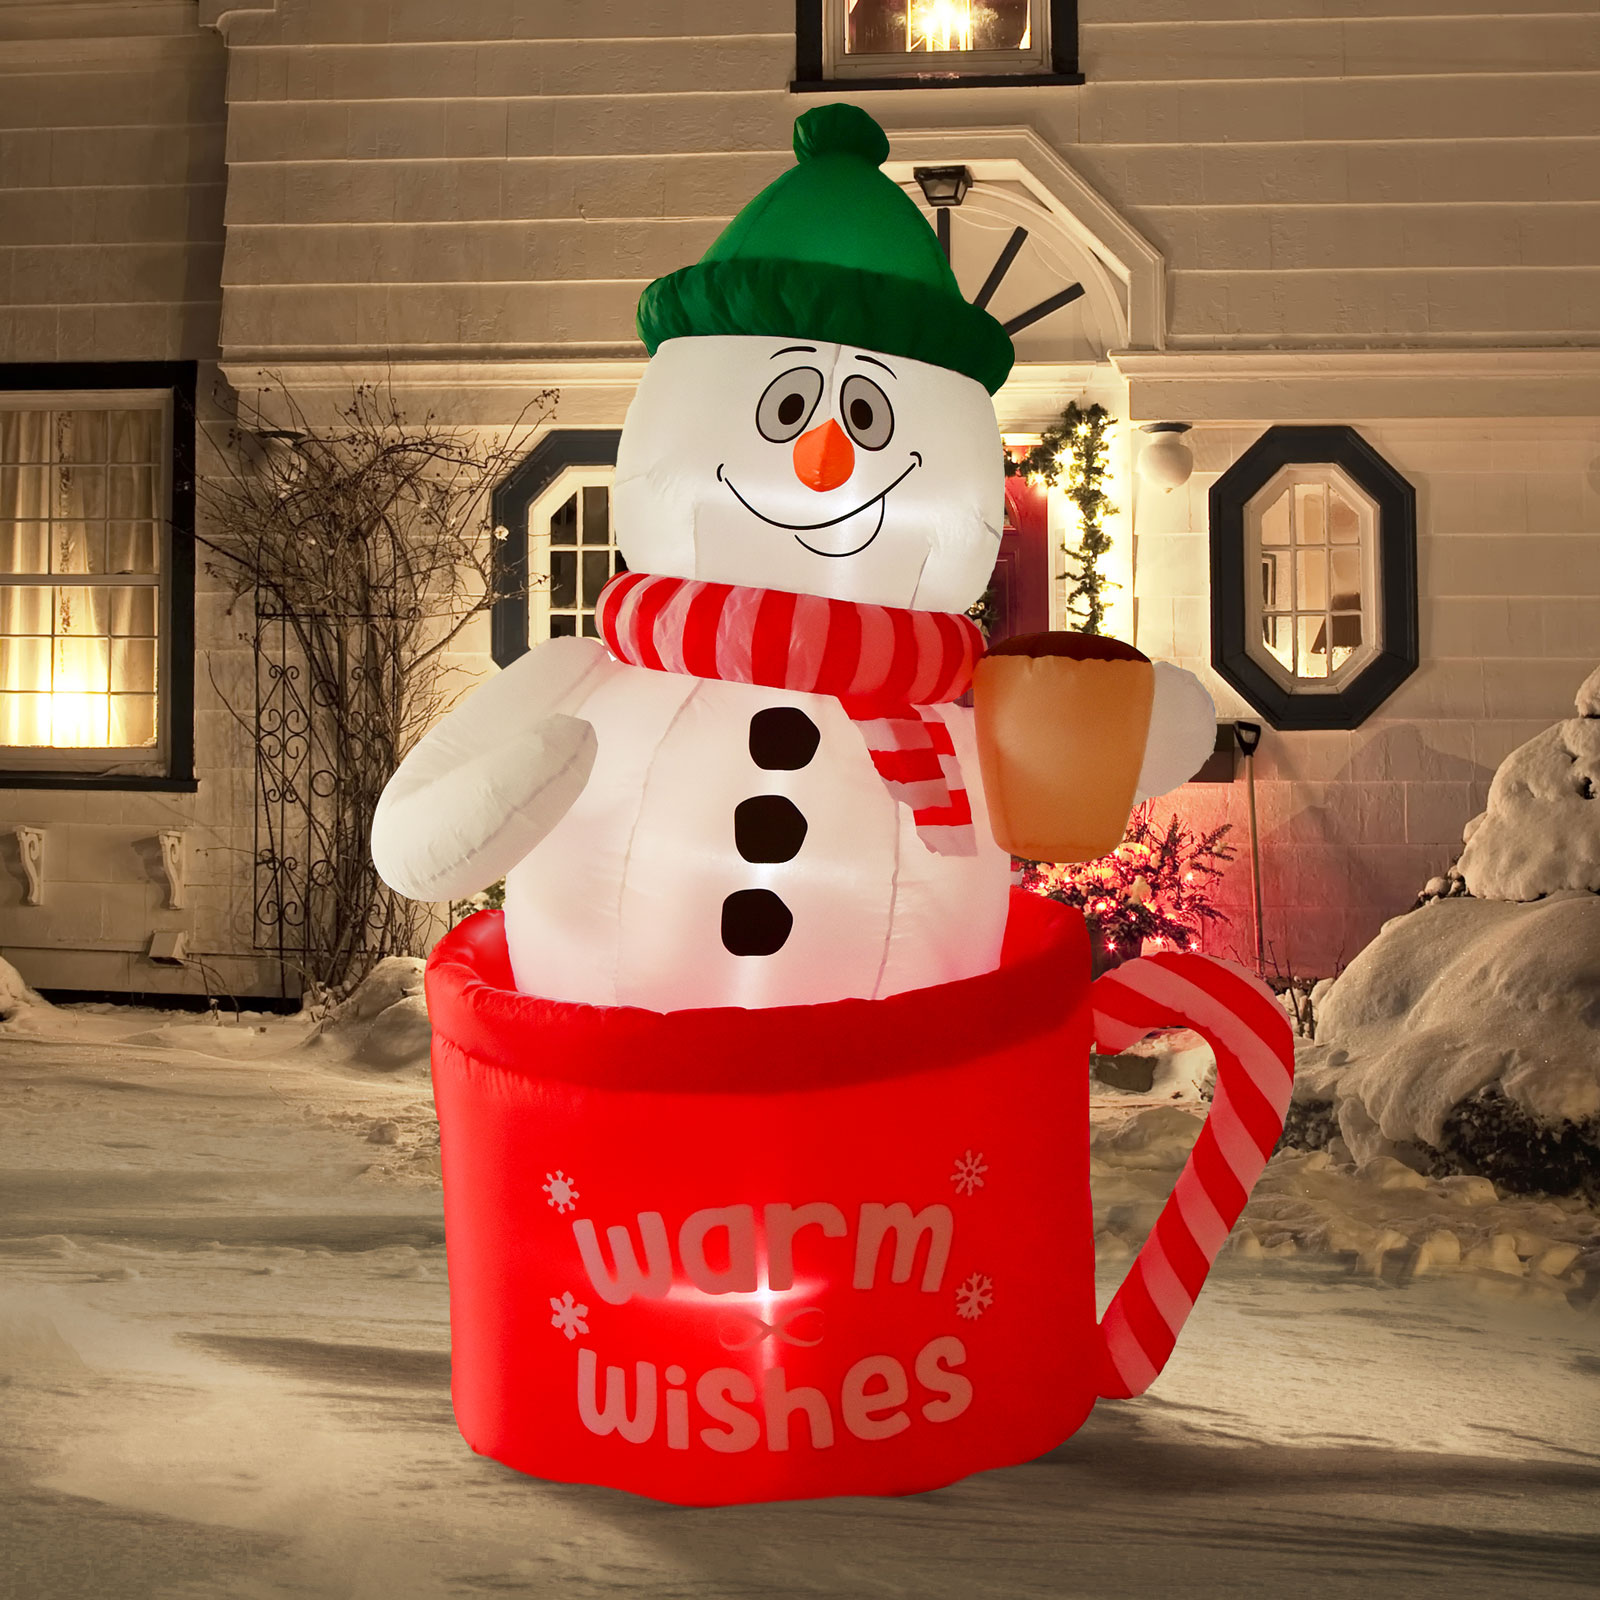 Nifti Nest 4 Ft Long x 6 Ft Tall Christmas Inflatables Snowman in Frosty Mug with Built-in LED Lights, Christmas Blow Up Yard Decorations for Holiday Lawn, Garden, Christmas Decorations - image 1 of 8